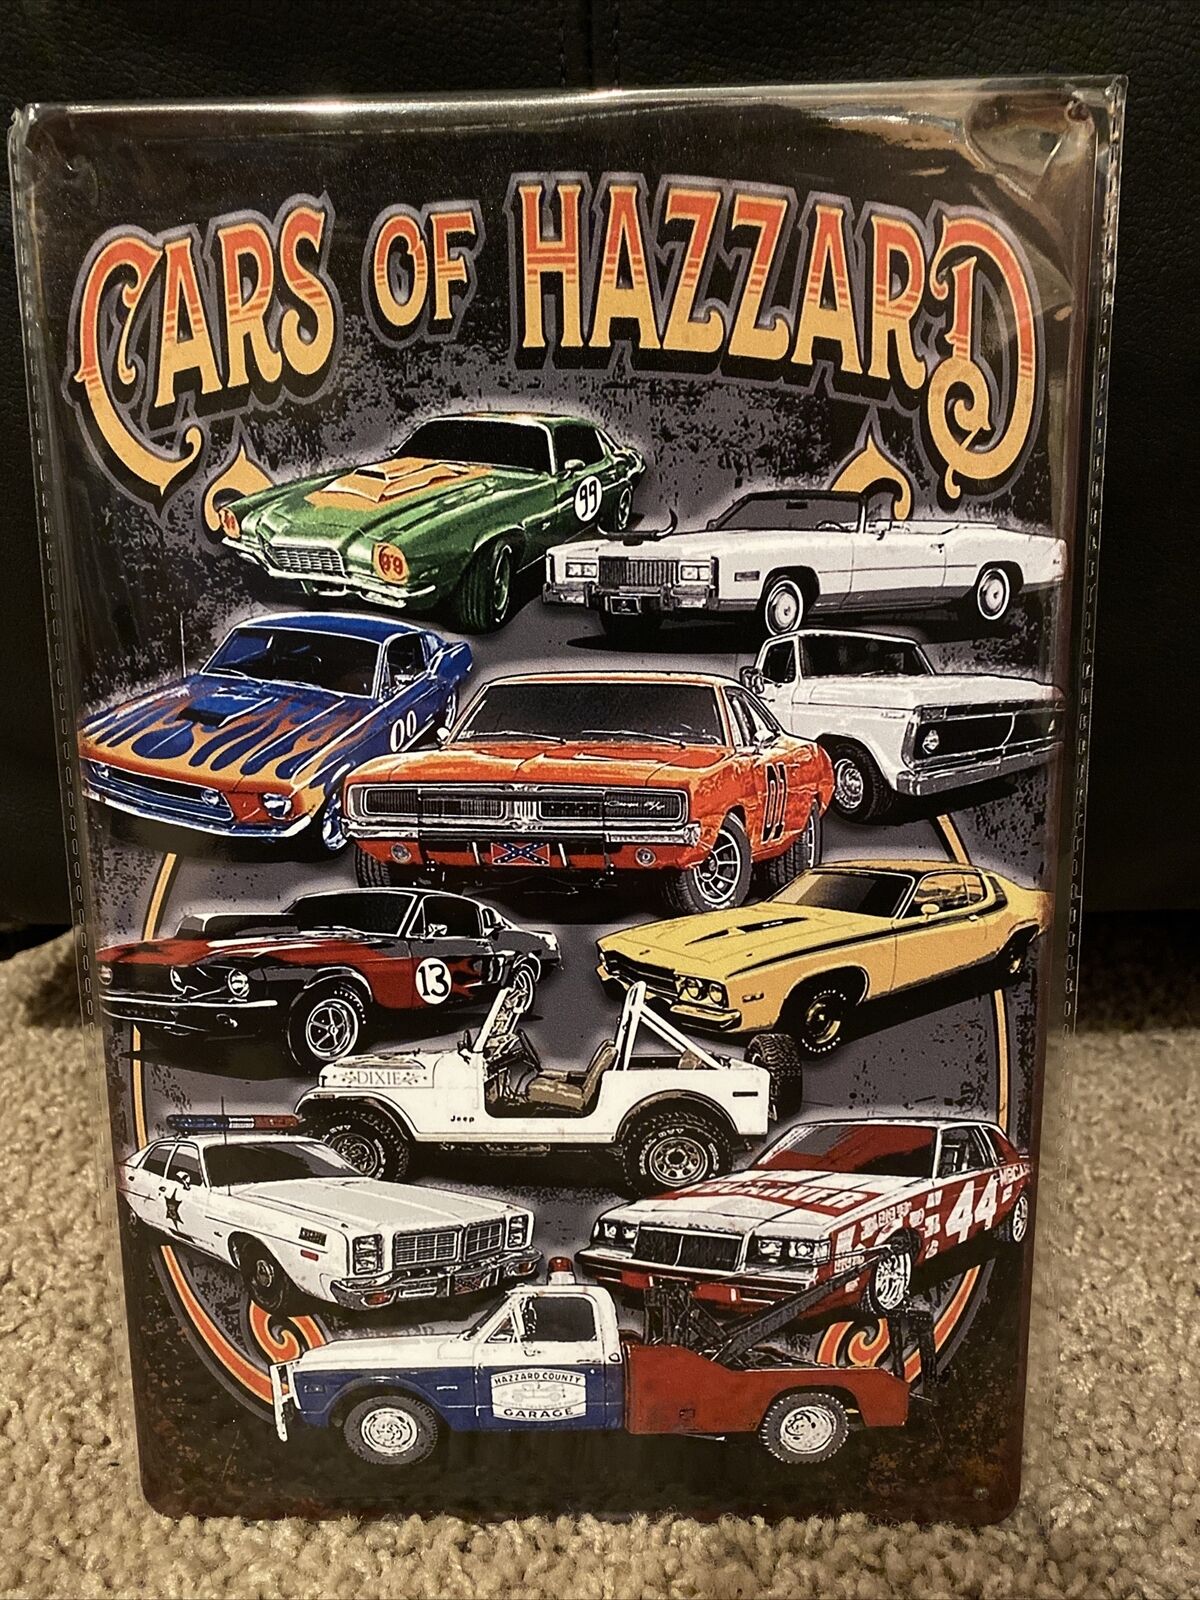 Dukes of Hazzard metal sign Featuring The Cars Of Hazzard New Sealed